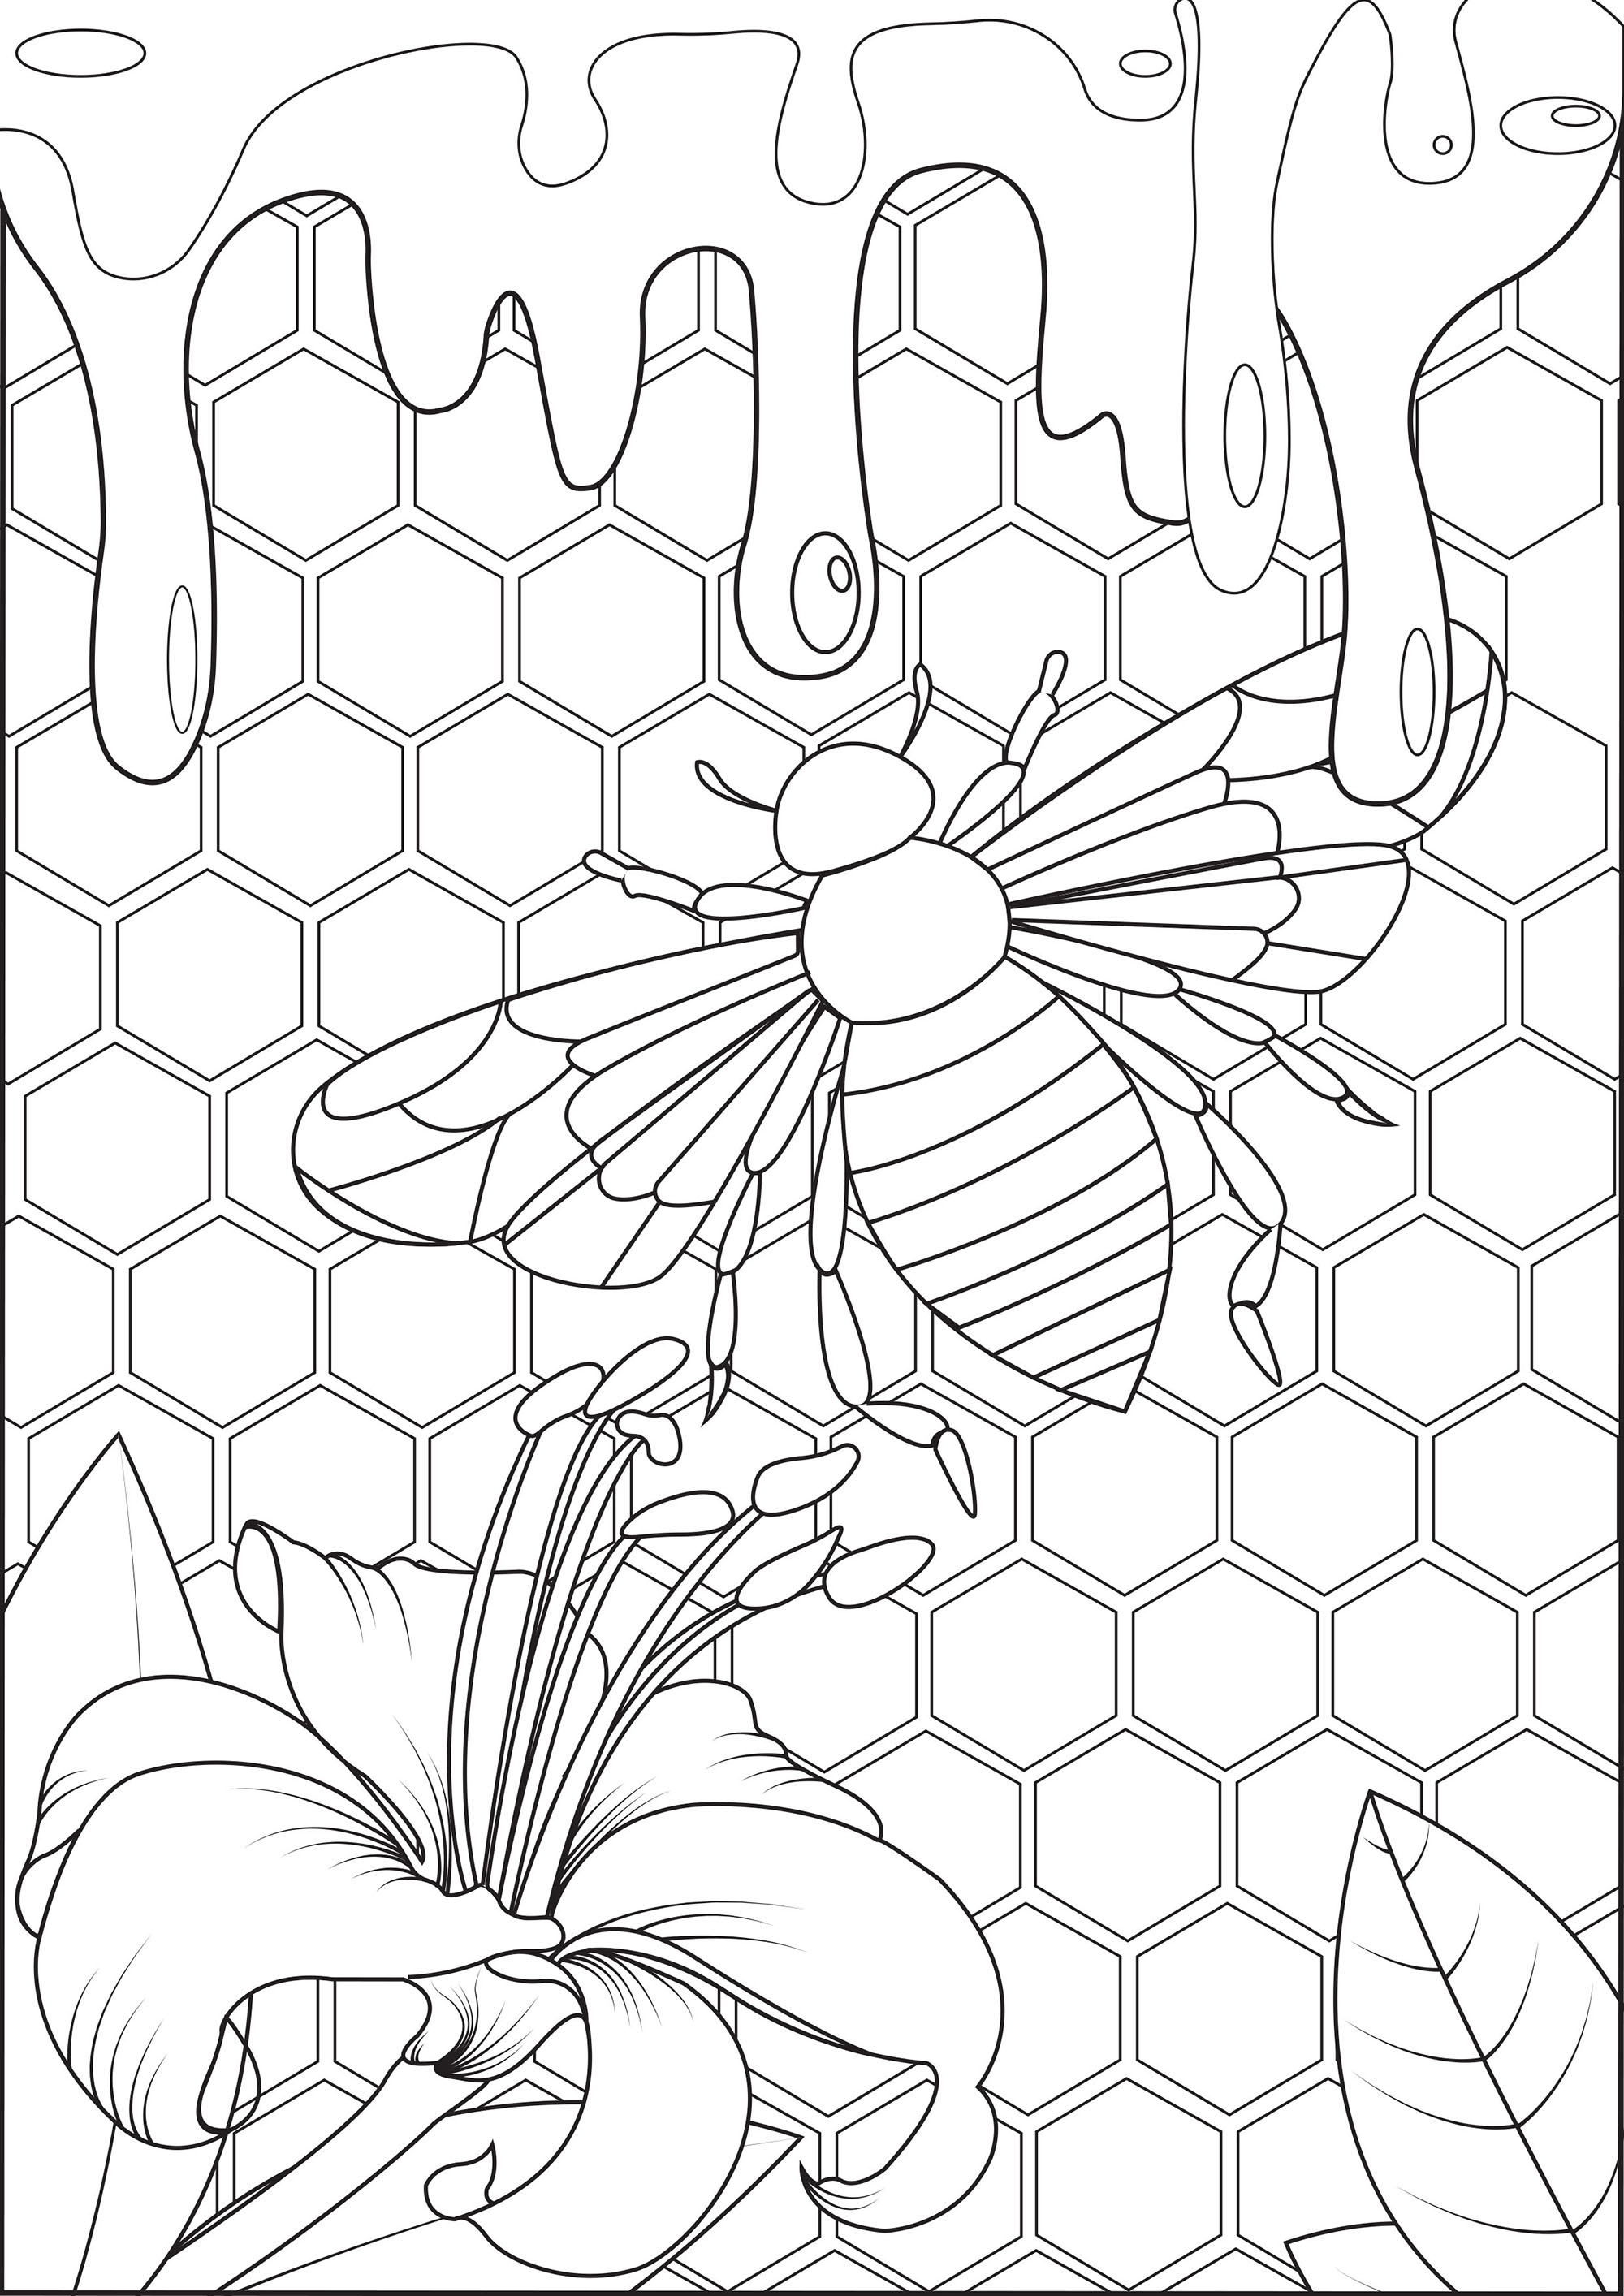 Bee and honey   Butterflies & insects Adult Coloring Pages